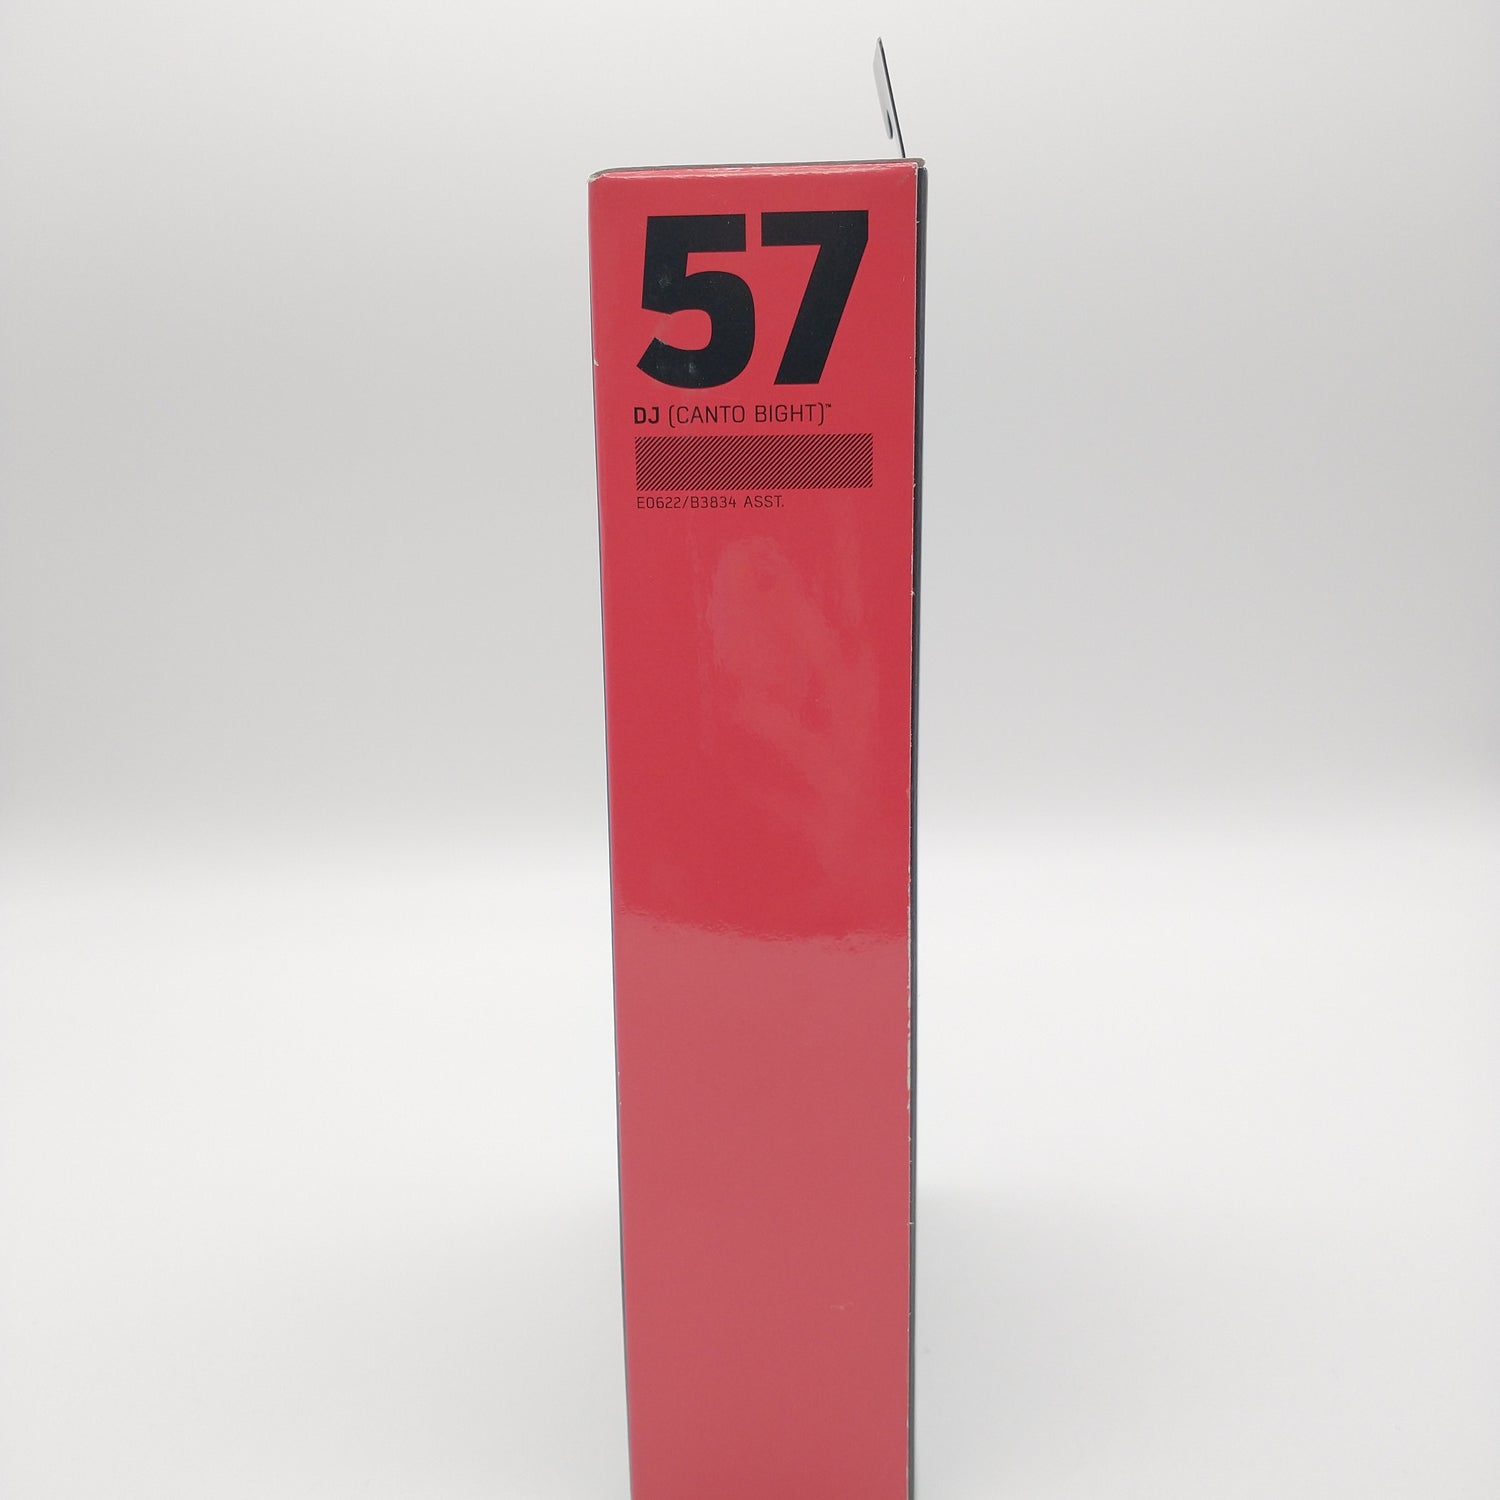 The side of the box. It's red with the number '57' in bold letters at the top.